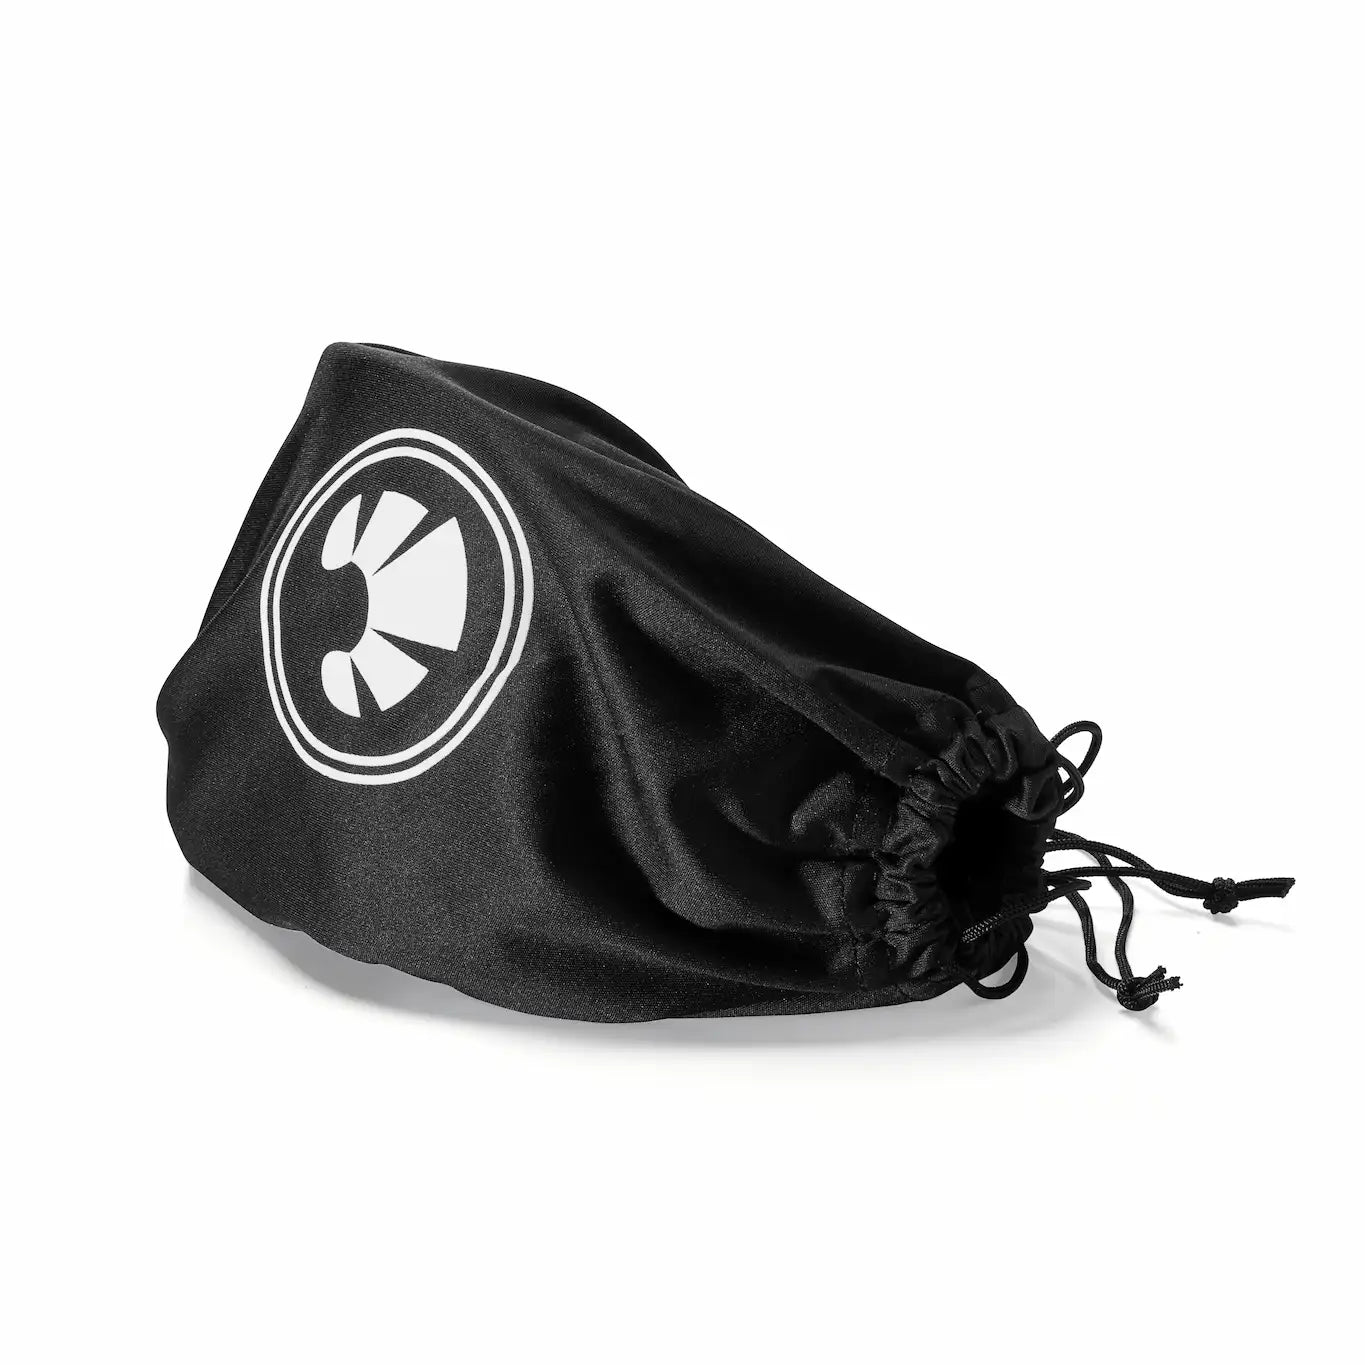 bakedsnow snowboard goggle protection pouch